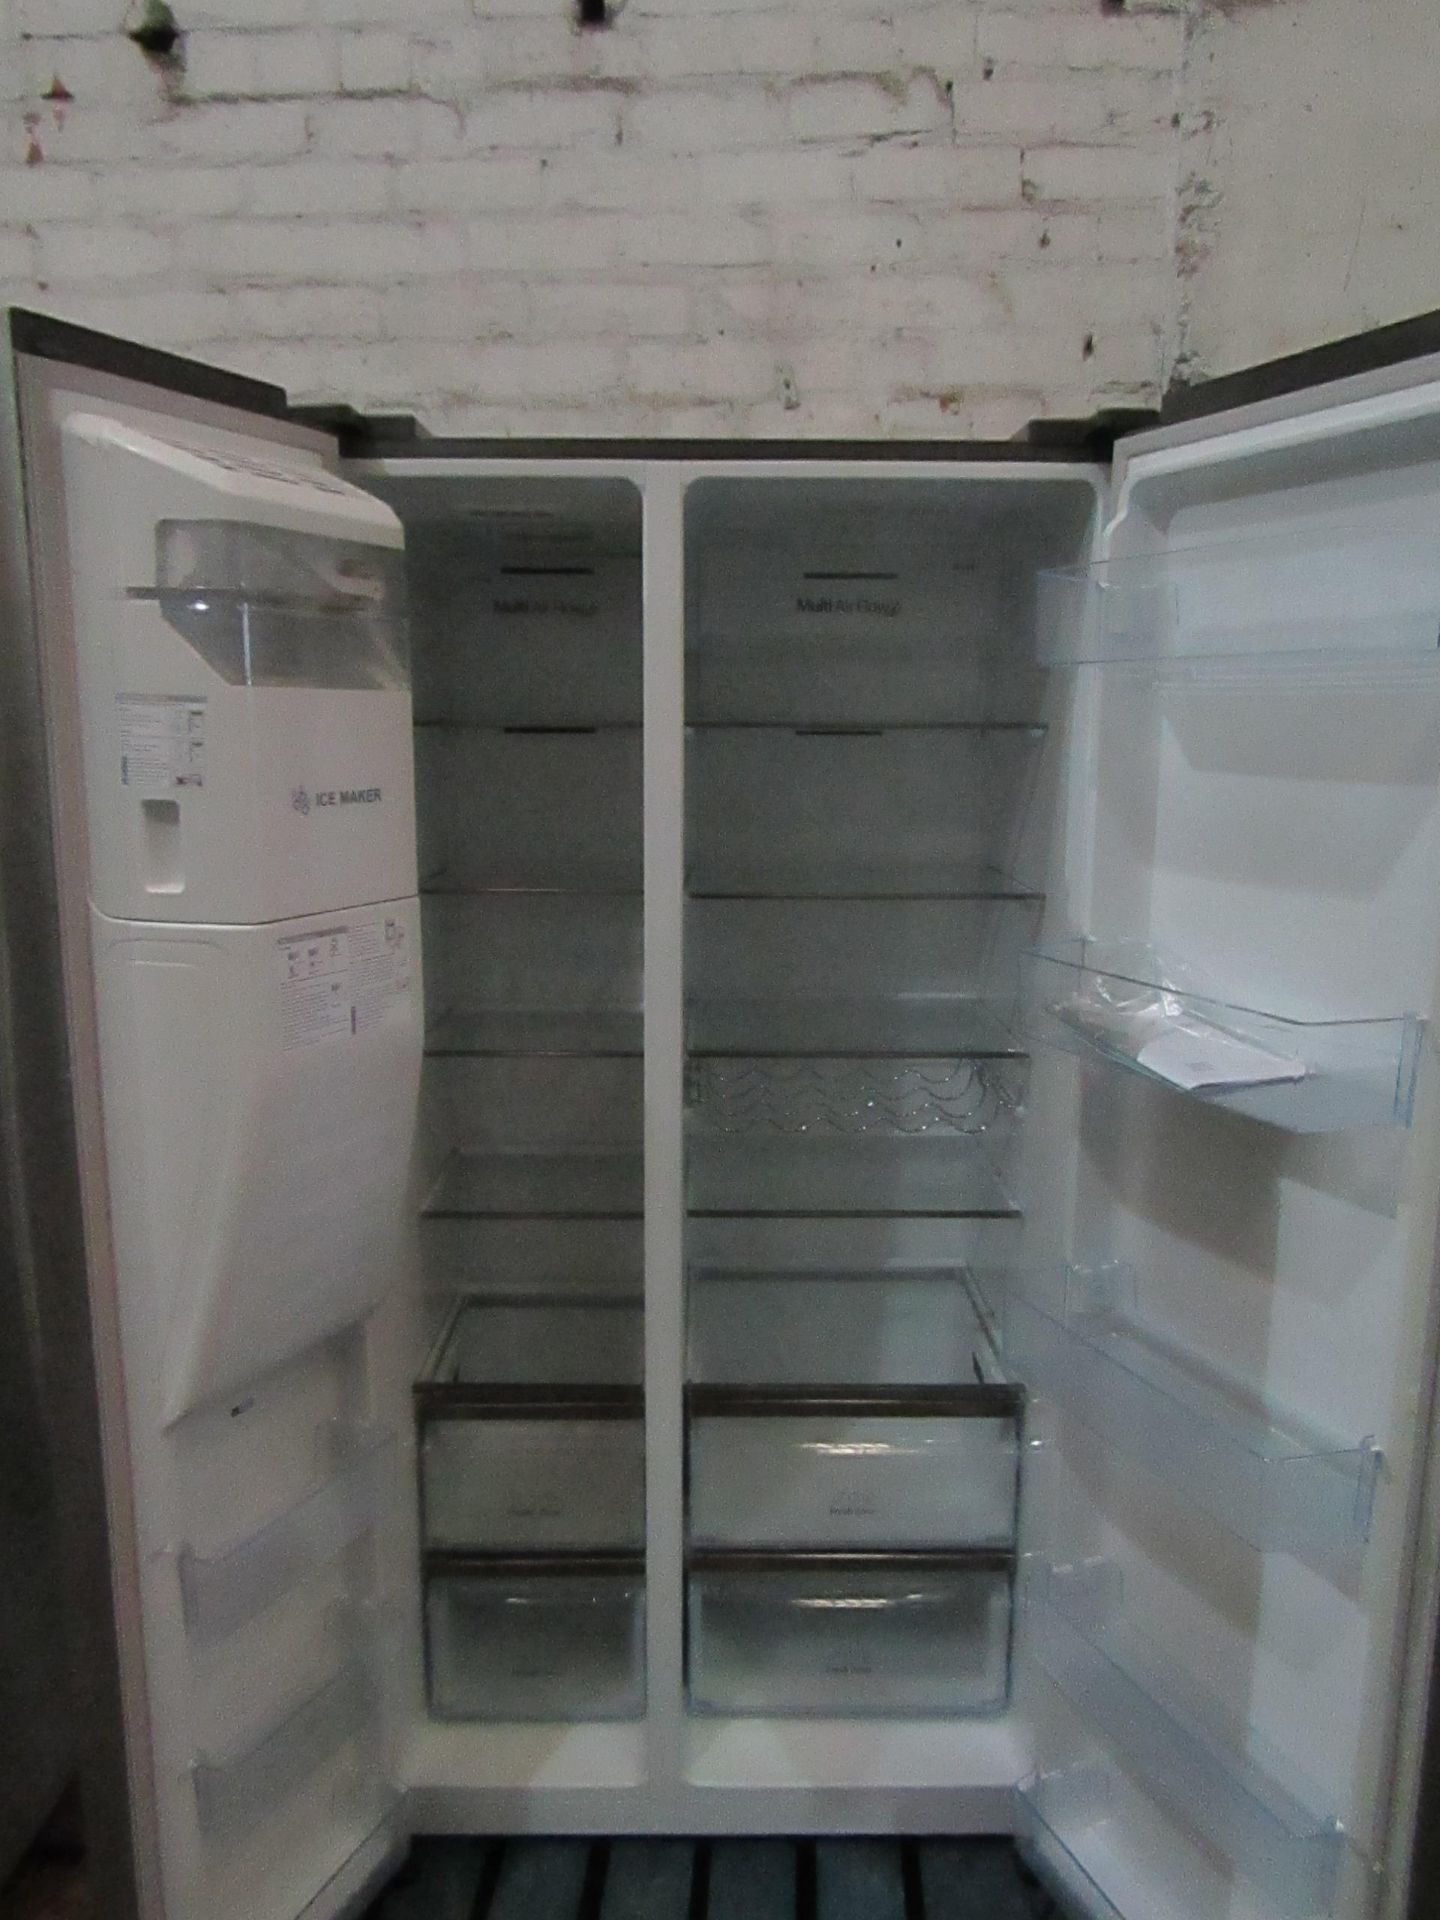 Hisense American fridge Freezer with water/ice dispenser, tested working for coldness in bboth - Image 2 of 2